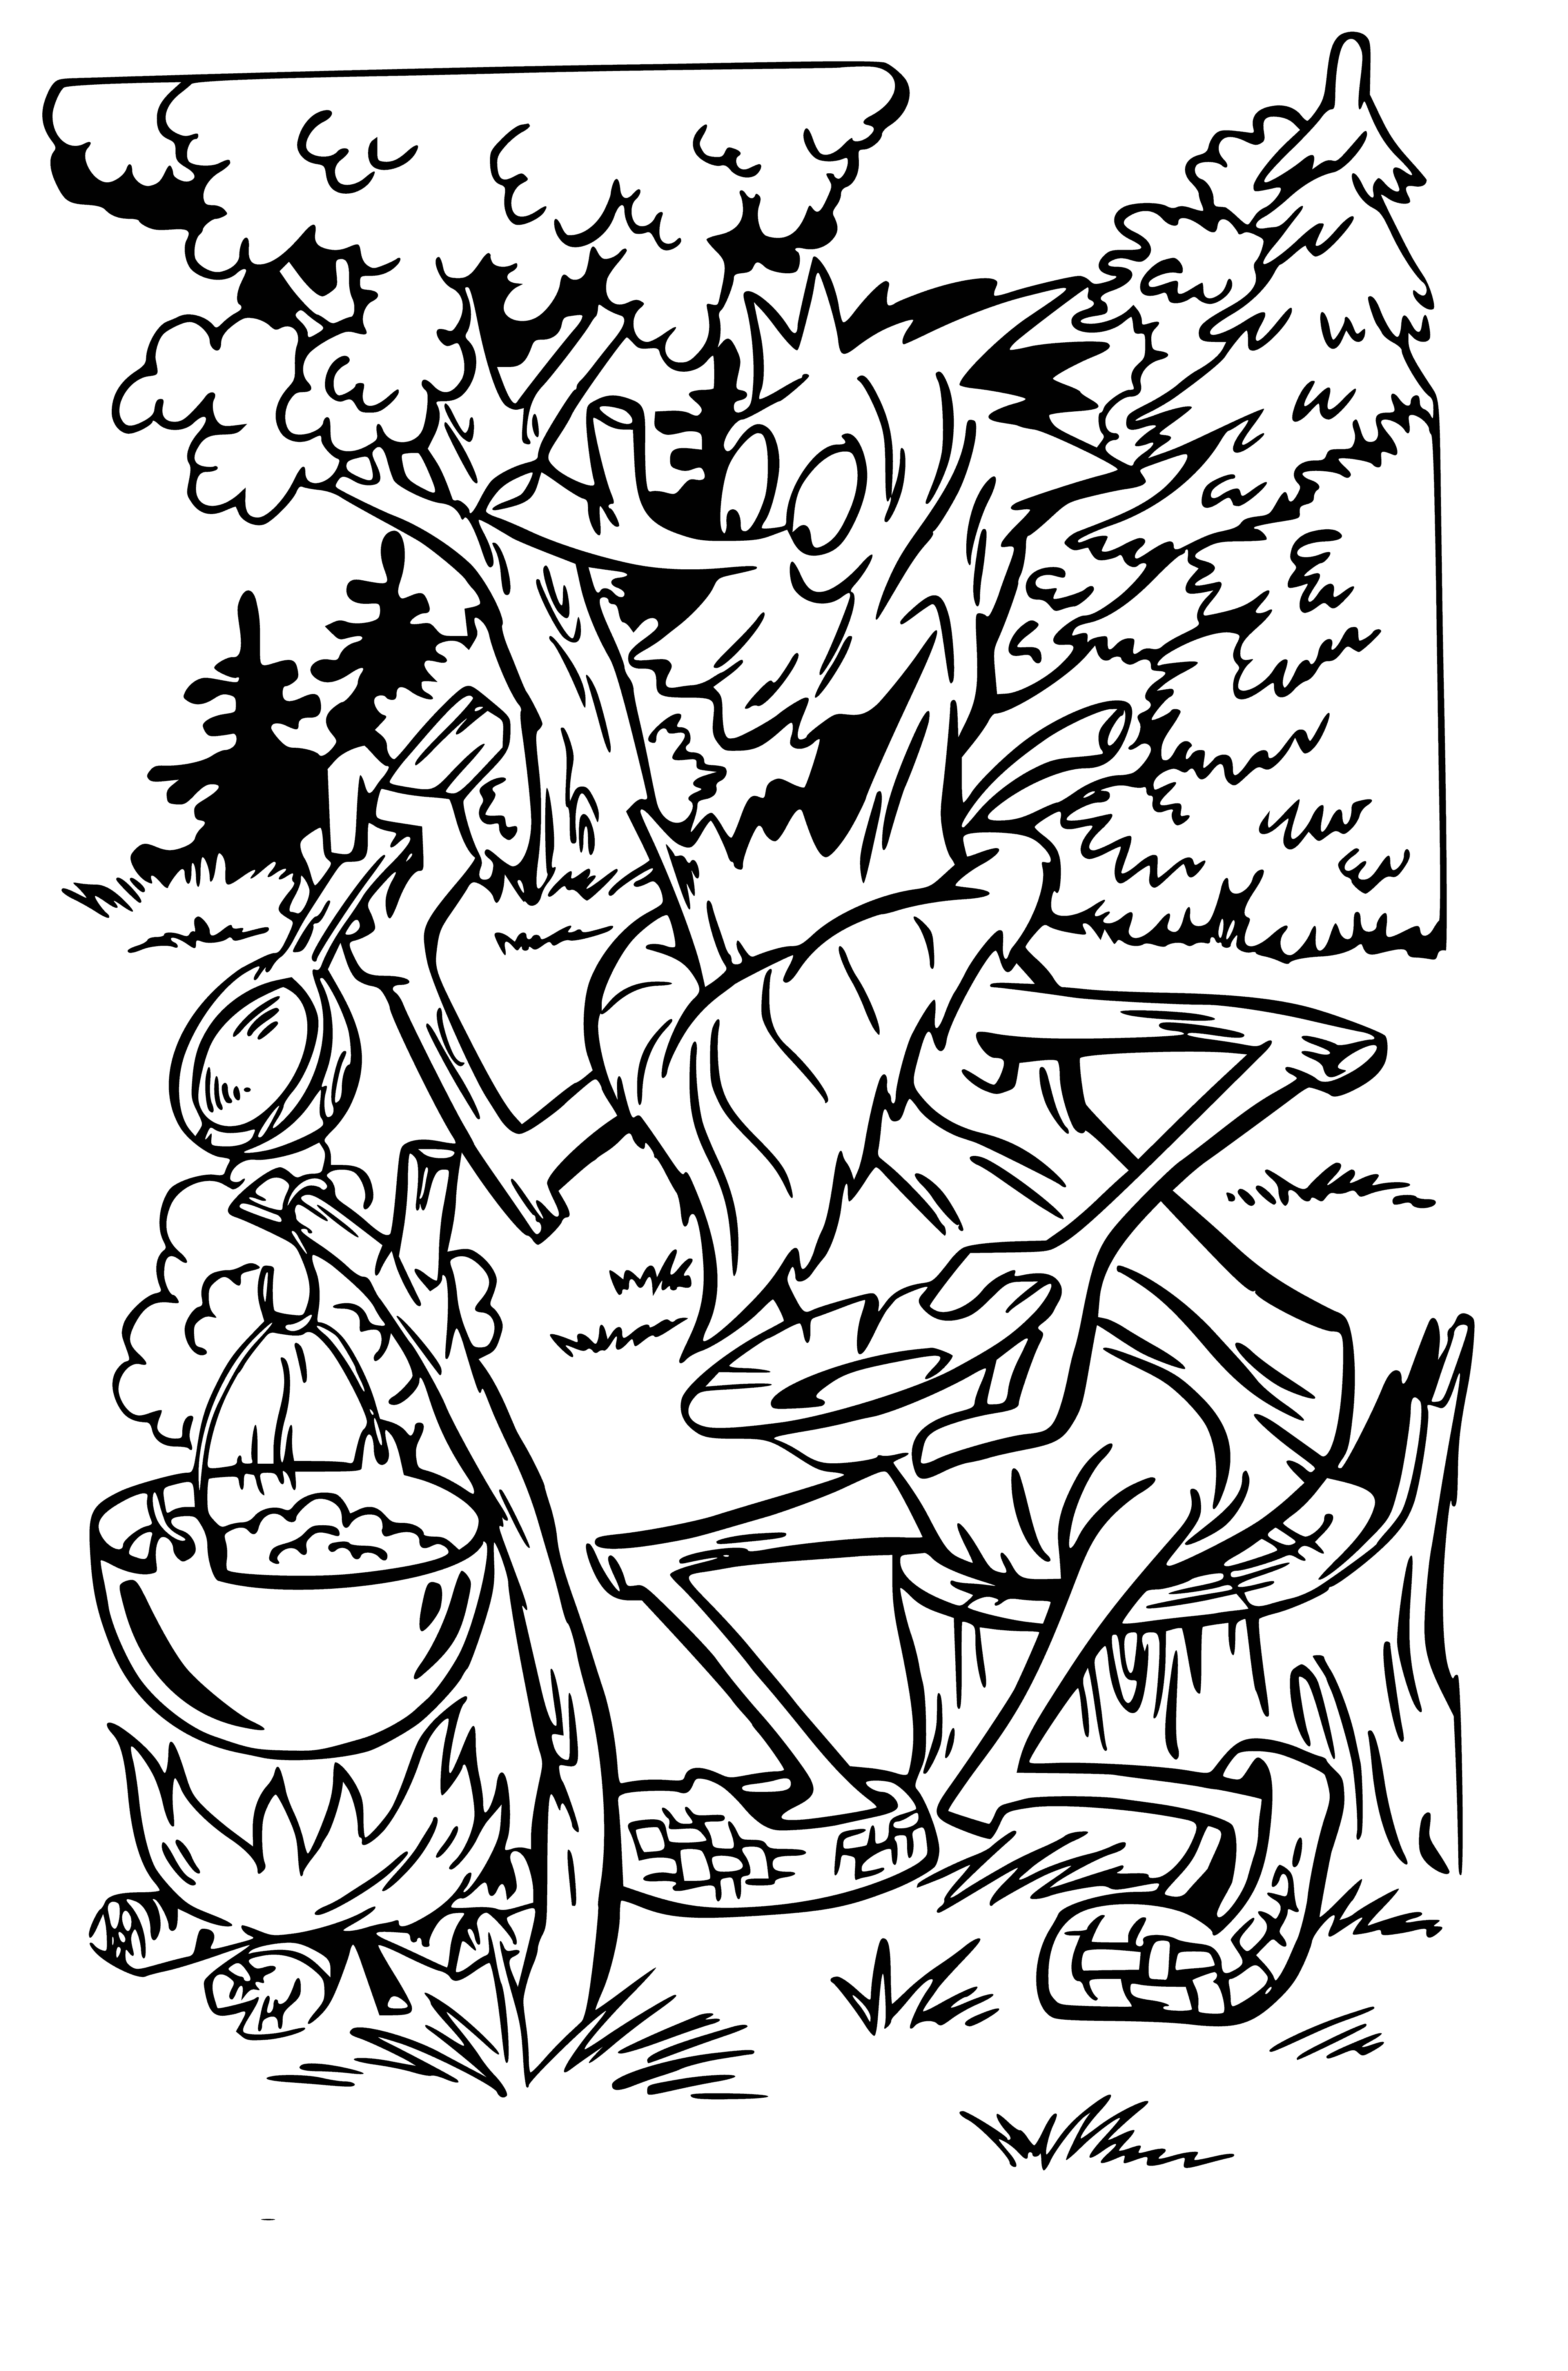 coloring page: Folklore warns of a small, dangerous goblin living in the forest; it's seen as a threat to children in a Russian folk tale featured in a coloring page.